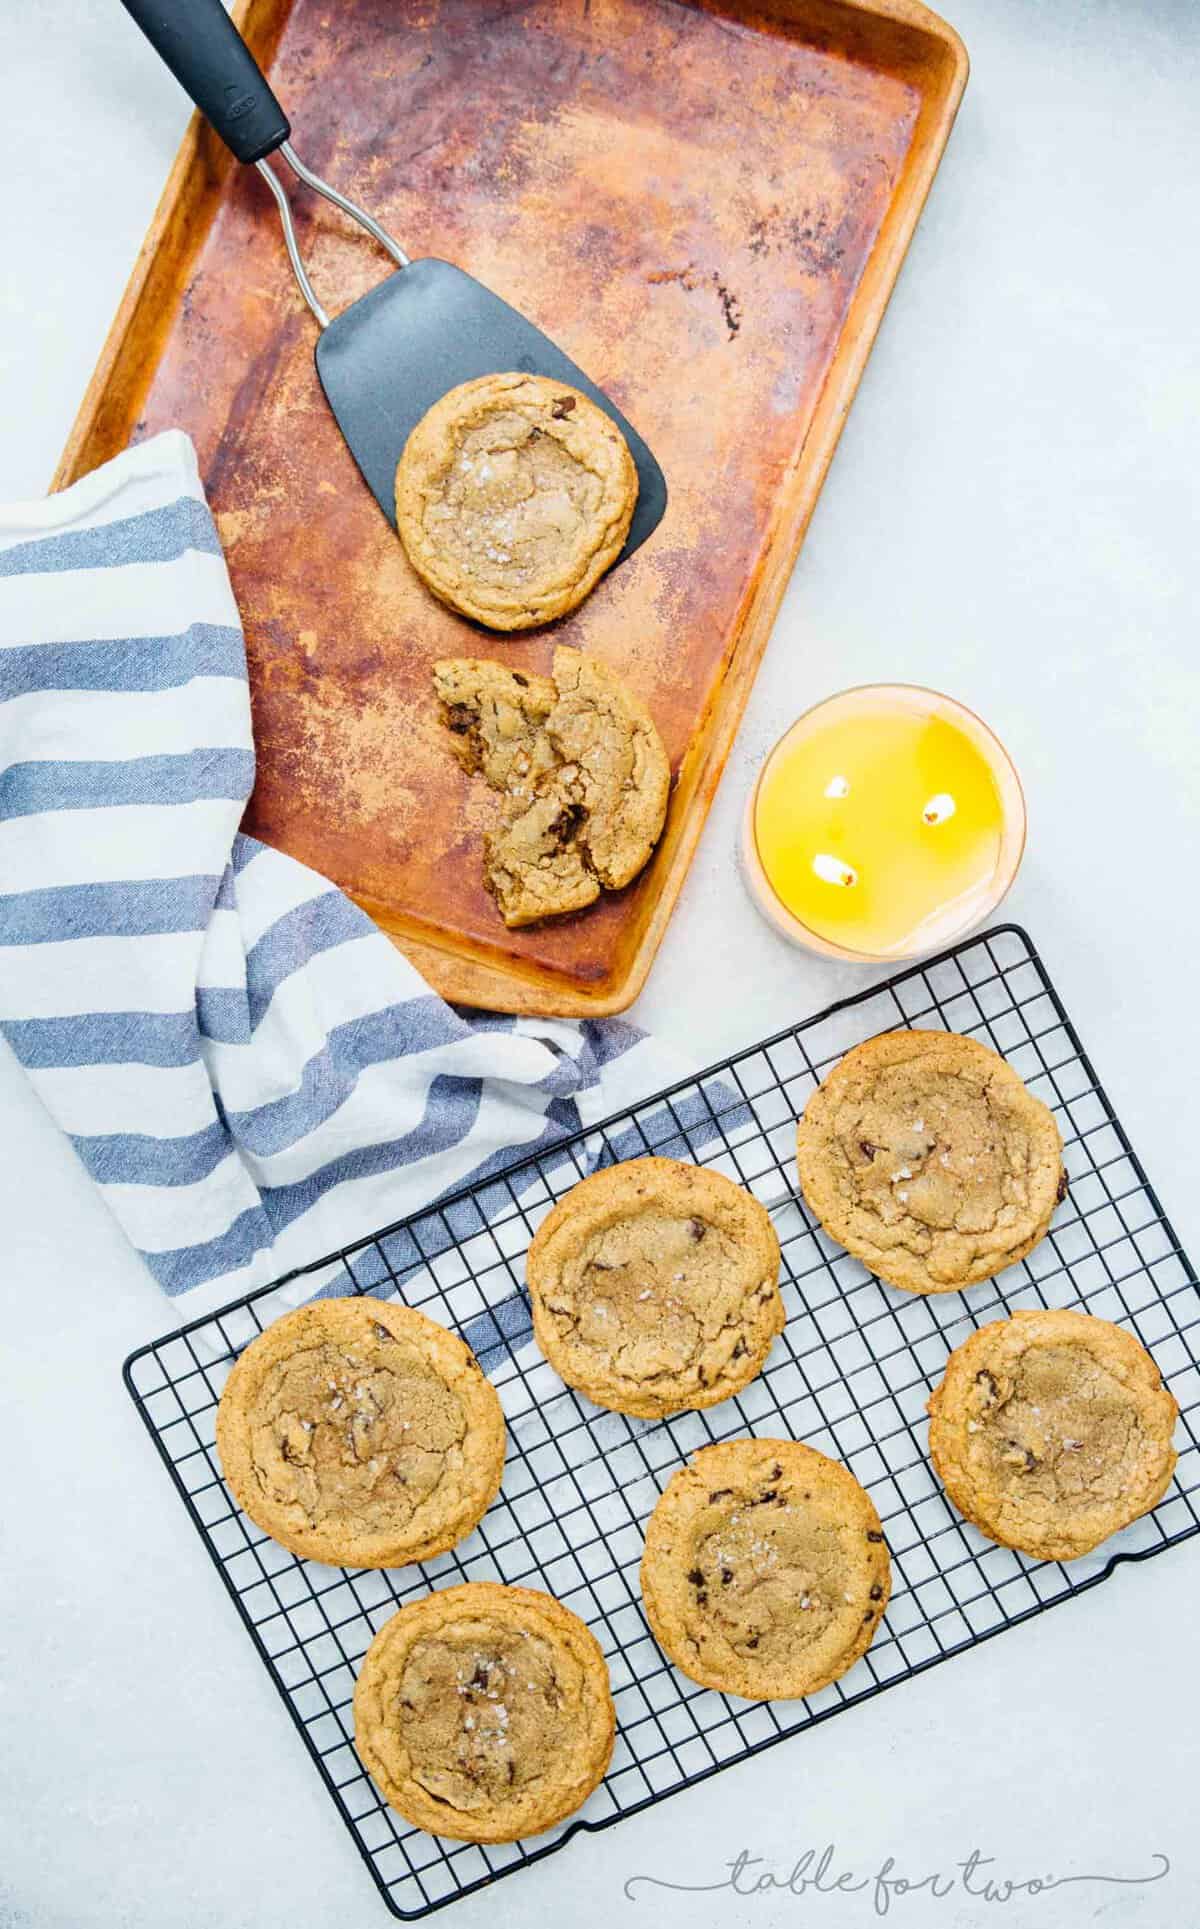 The perfect cookie has crispy edges with a soft and chewy center! These chewy chai chocolate chunk cookies do not disappoint and you'll love having a batch of these in the oven because it makes your house smell so delicious! The warming chai spice is the perfect addition to these cookies!